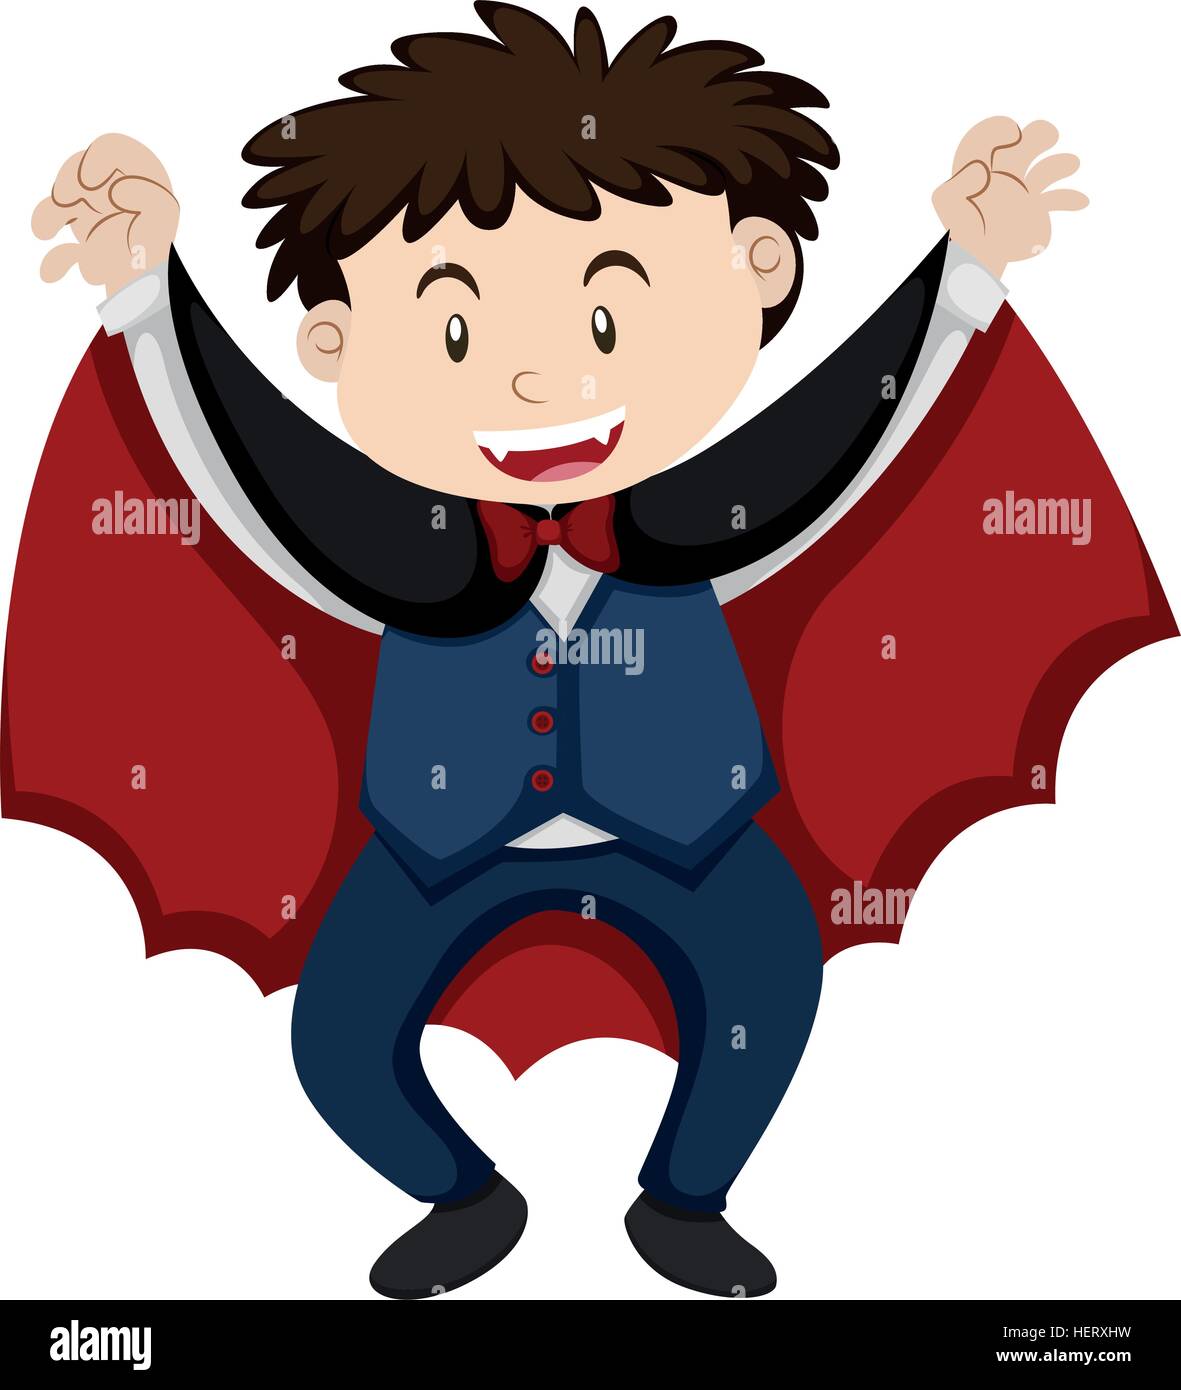 Boy in vampire outfit illustration Stock Vector